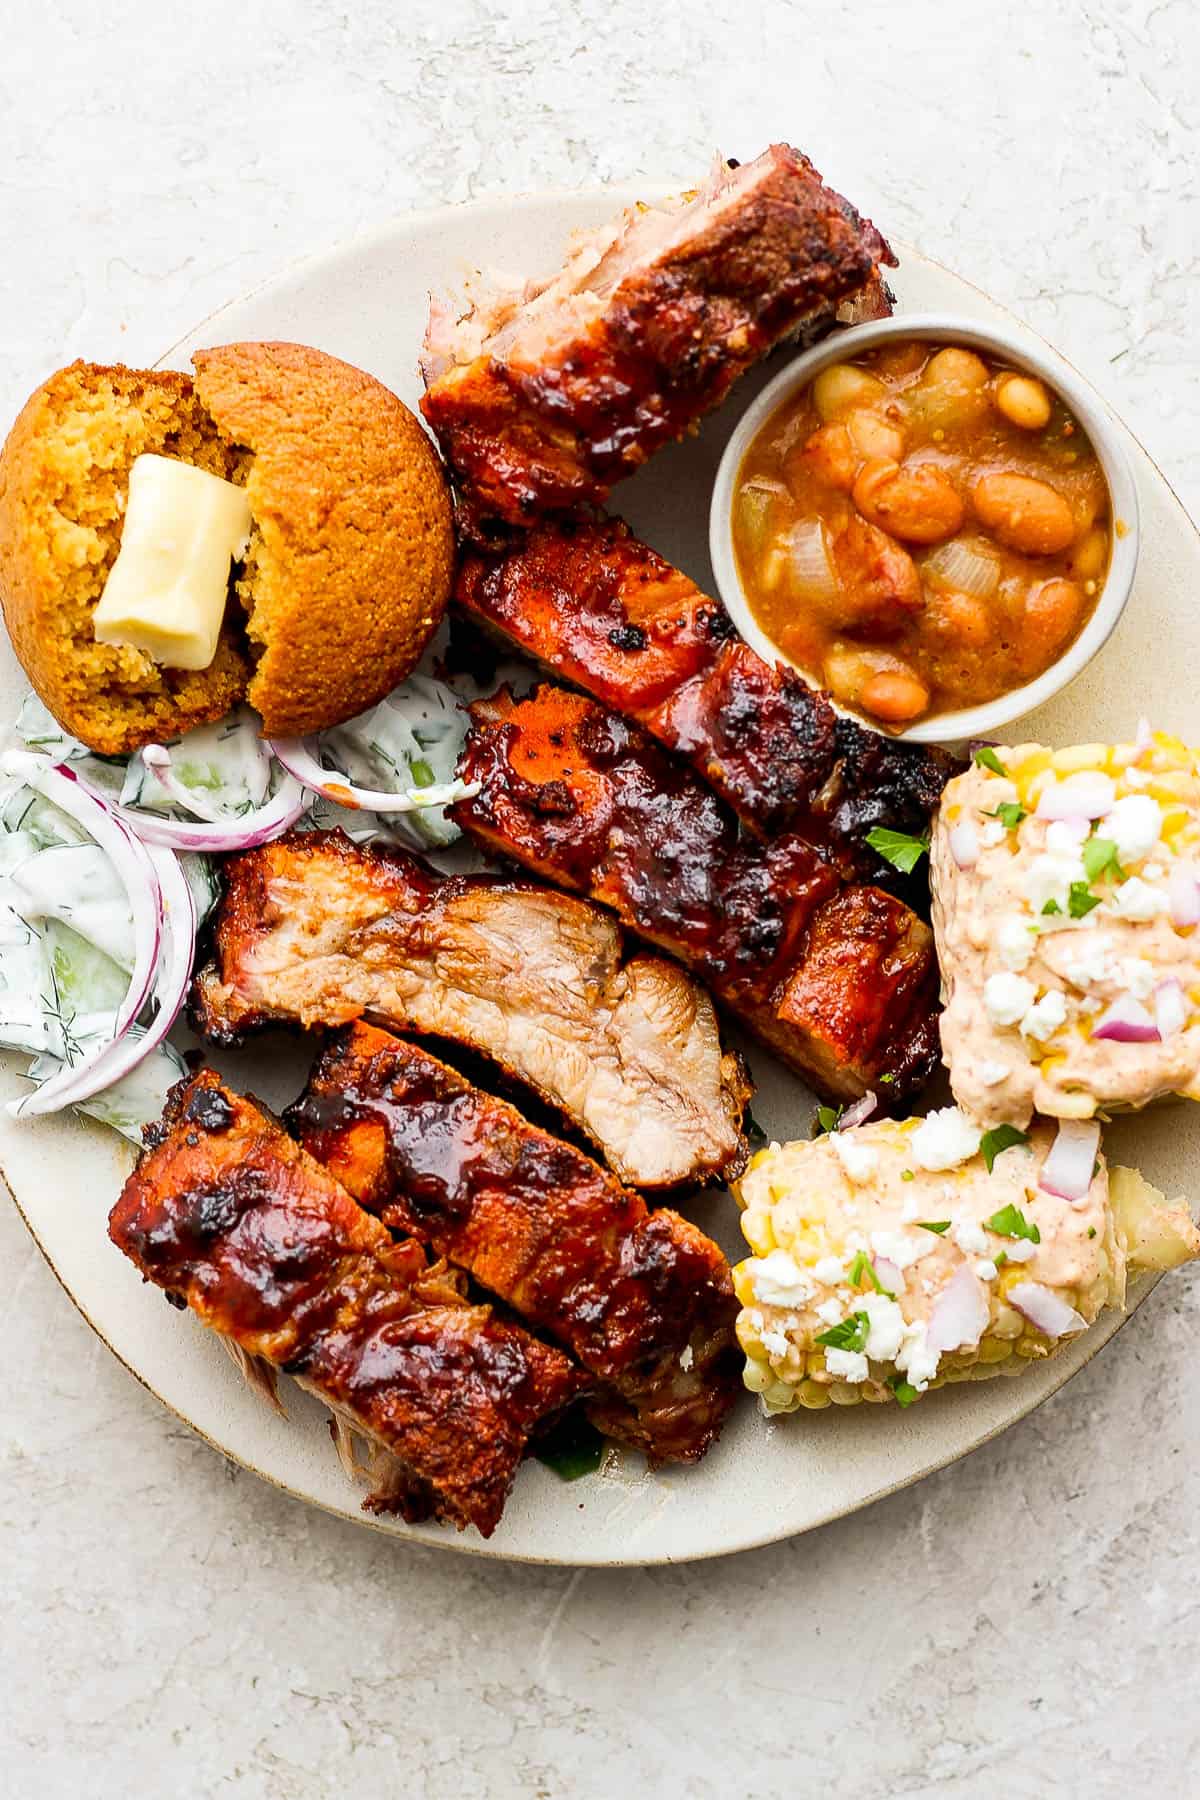 A small dish of baked beans on a plate with ribs, coleslaw, cornbread, and mexican street corn.